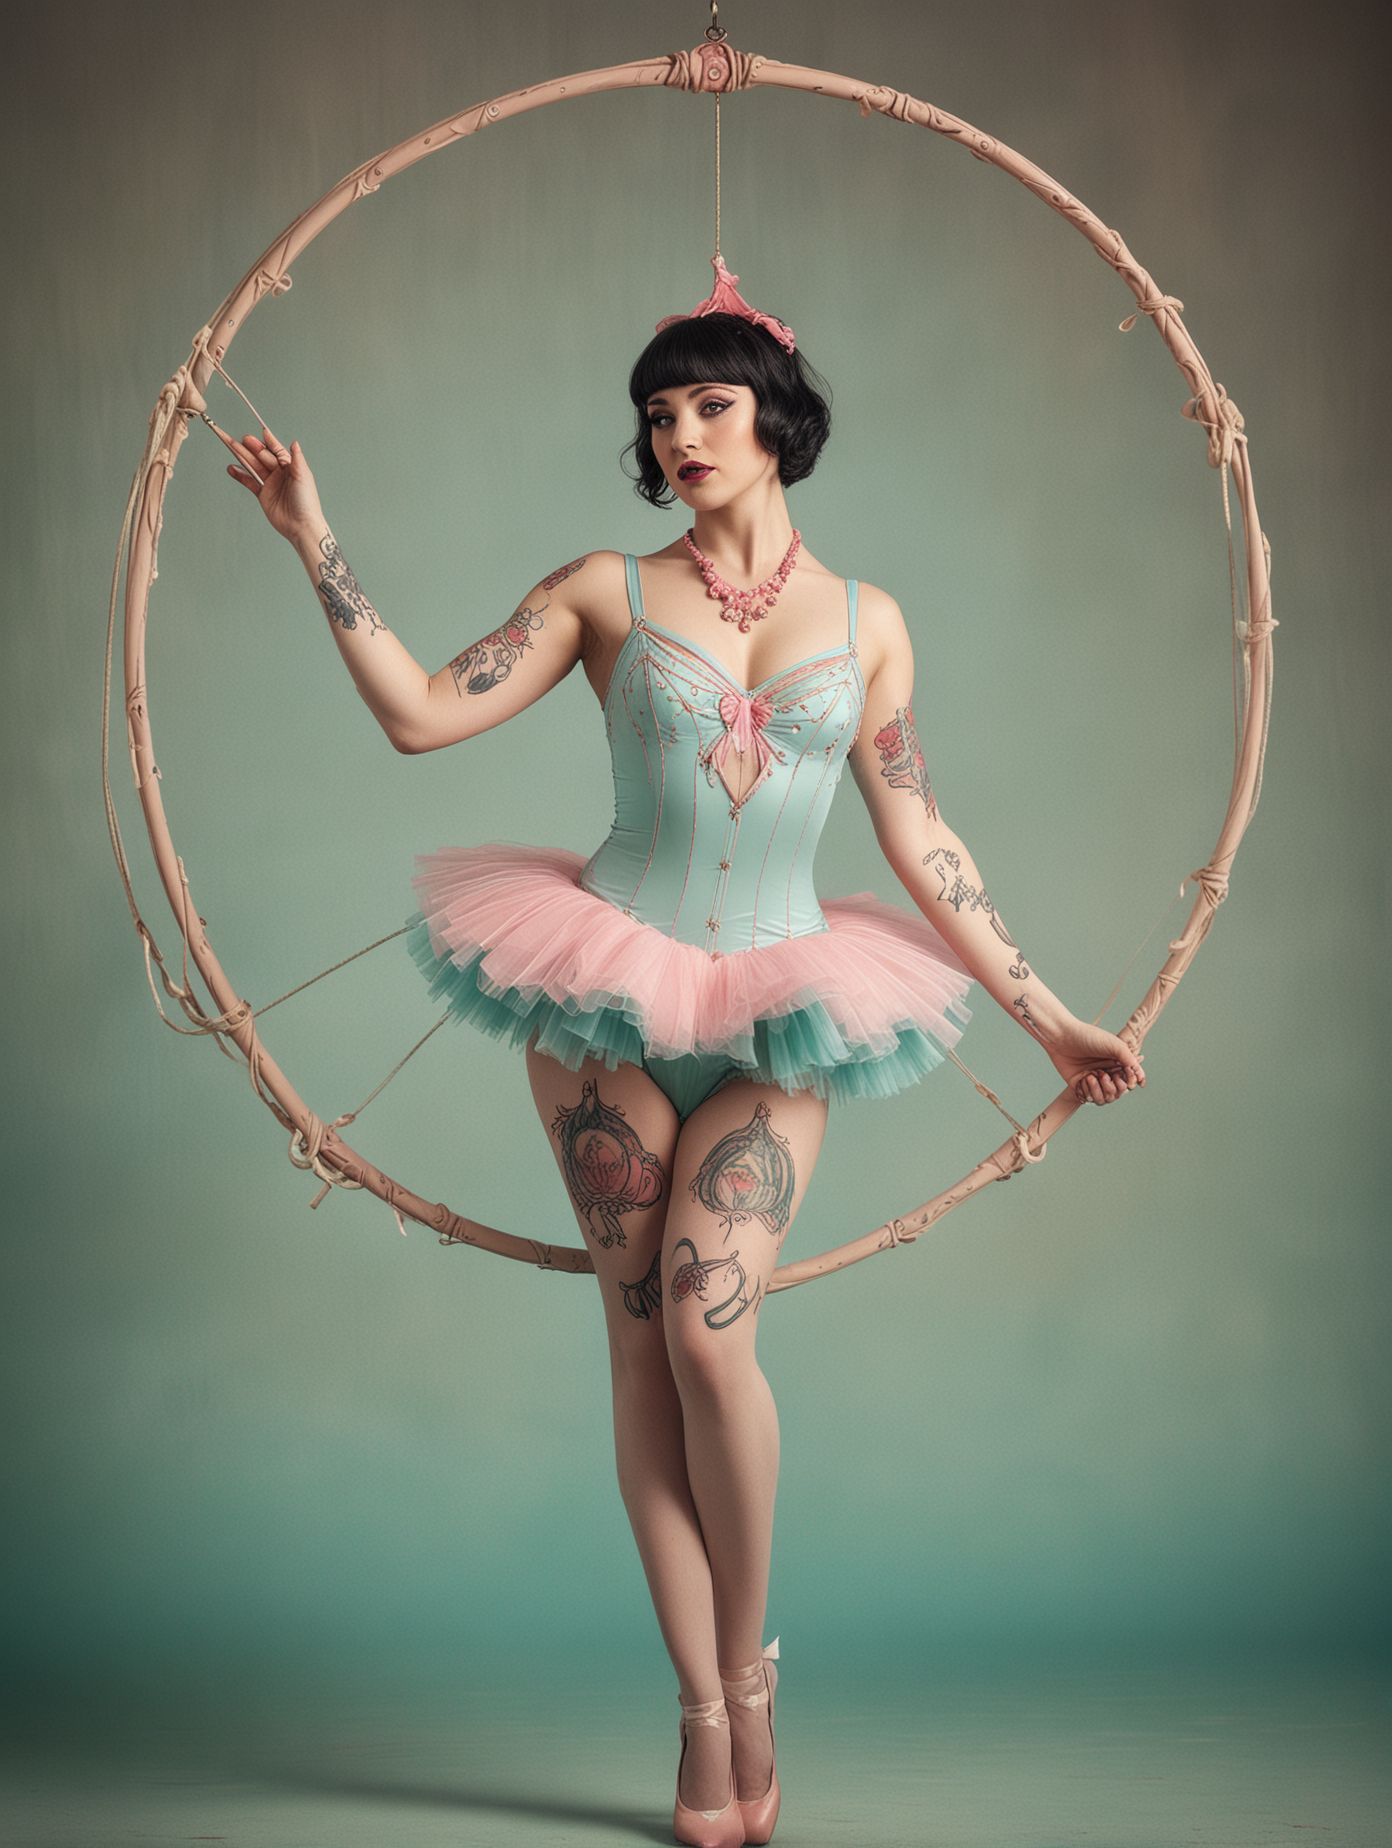 circus, in the style of whimsical yet eerie symbolism, American 1920's circus, light cyan and pink palette, close up portraiture, well built busty female acrobat with black hair, wearing a leotard and tutu, covered in tatoos, holding an aerial hoop, nature-inspired pieces, circus costumes, ultra details